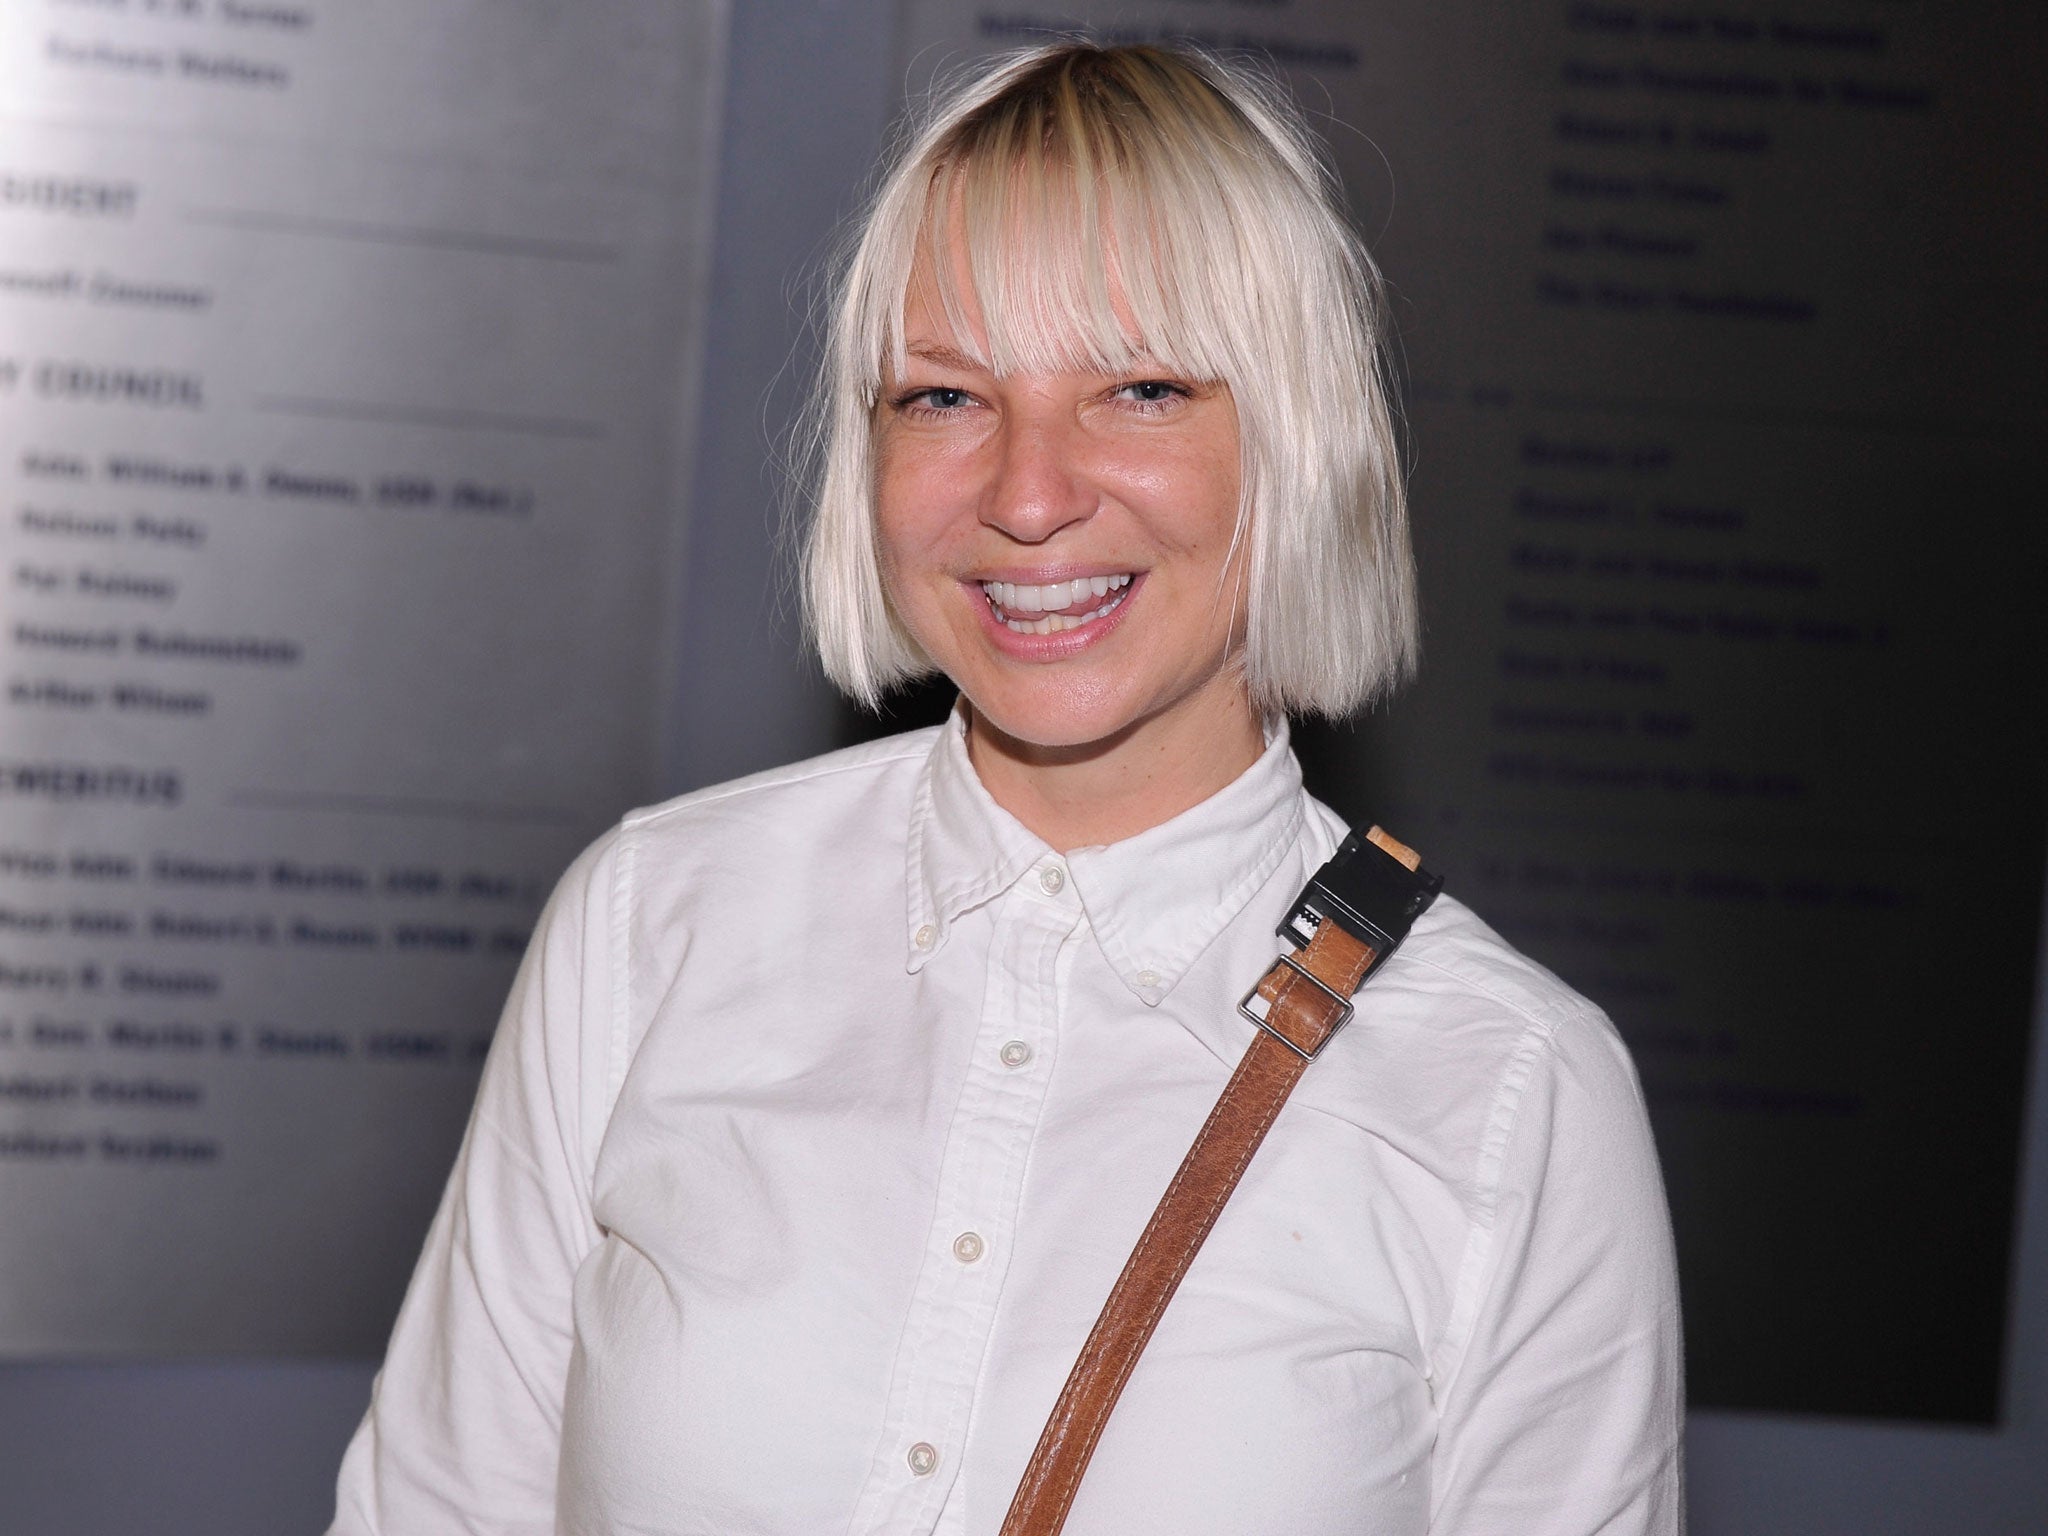 Singer Sia has agreed to donate the fee she received from a recent Eminem collaboration to an LGBT charity